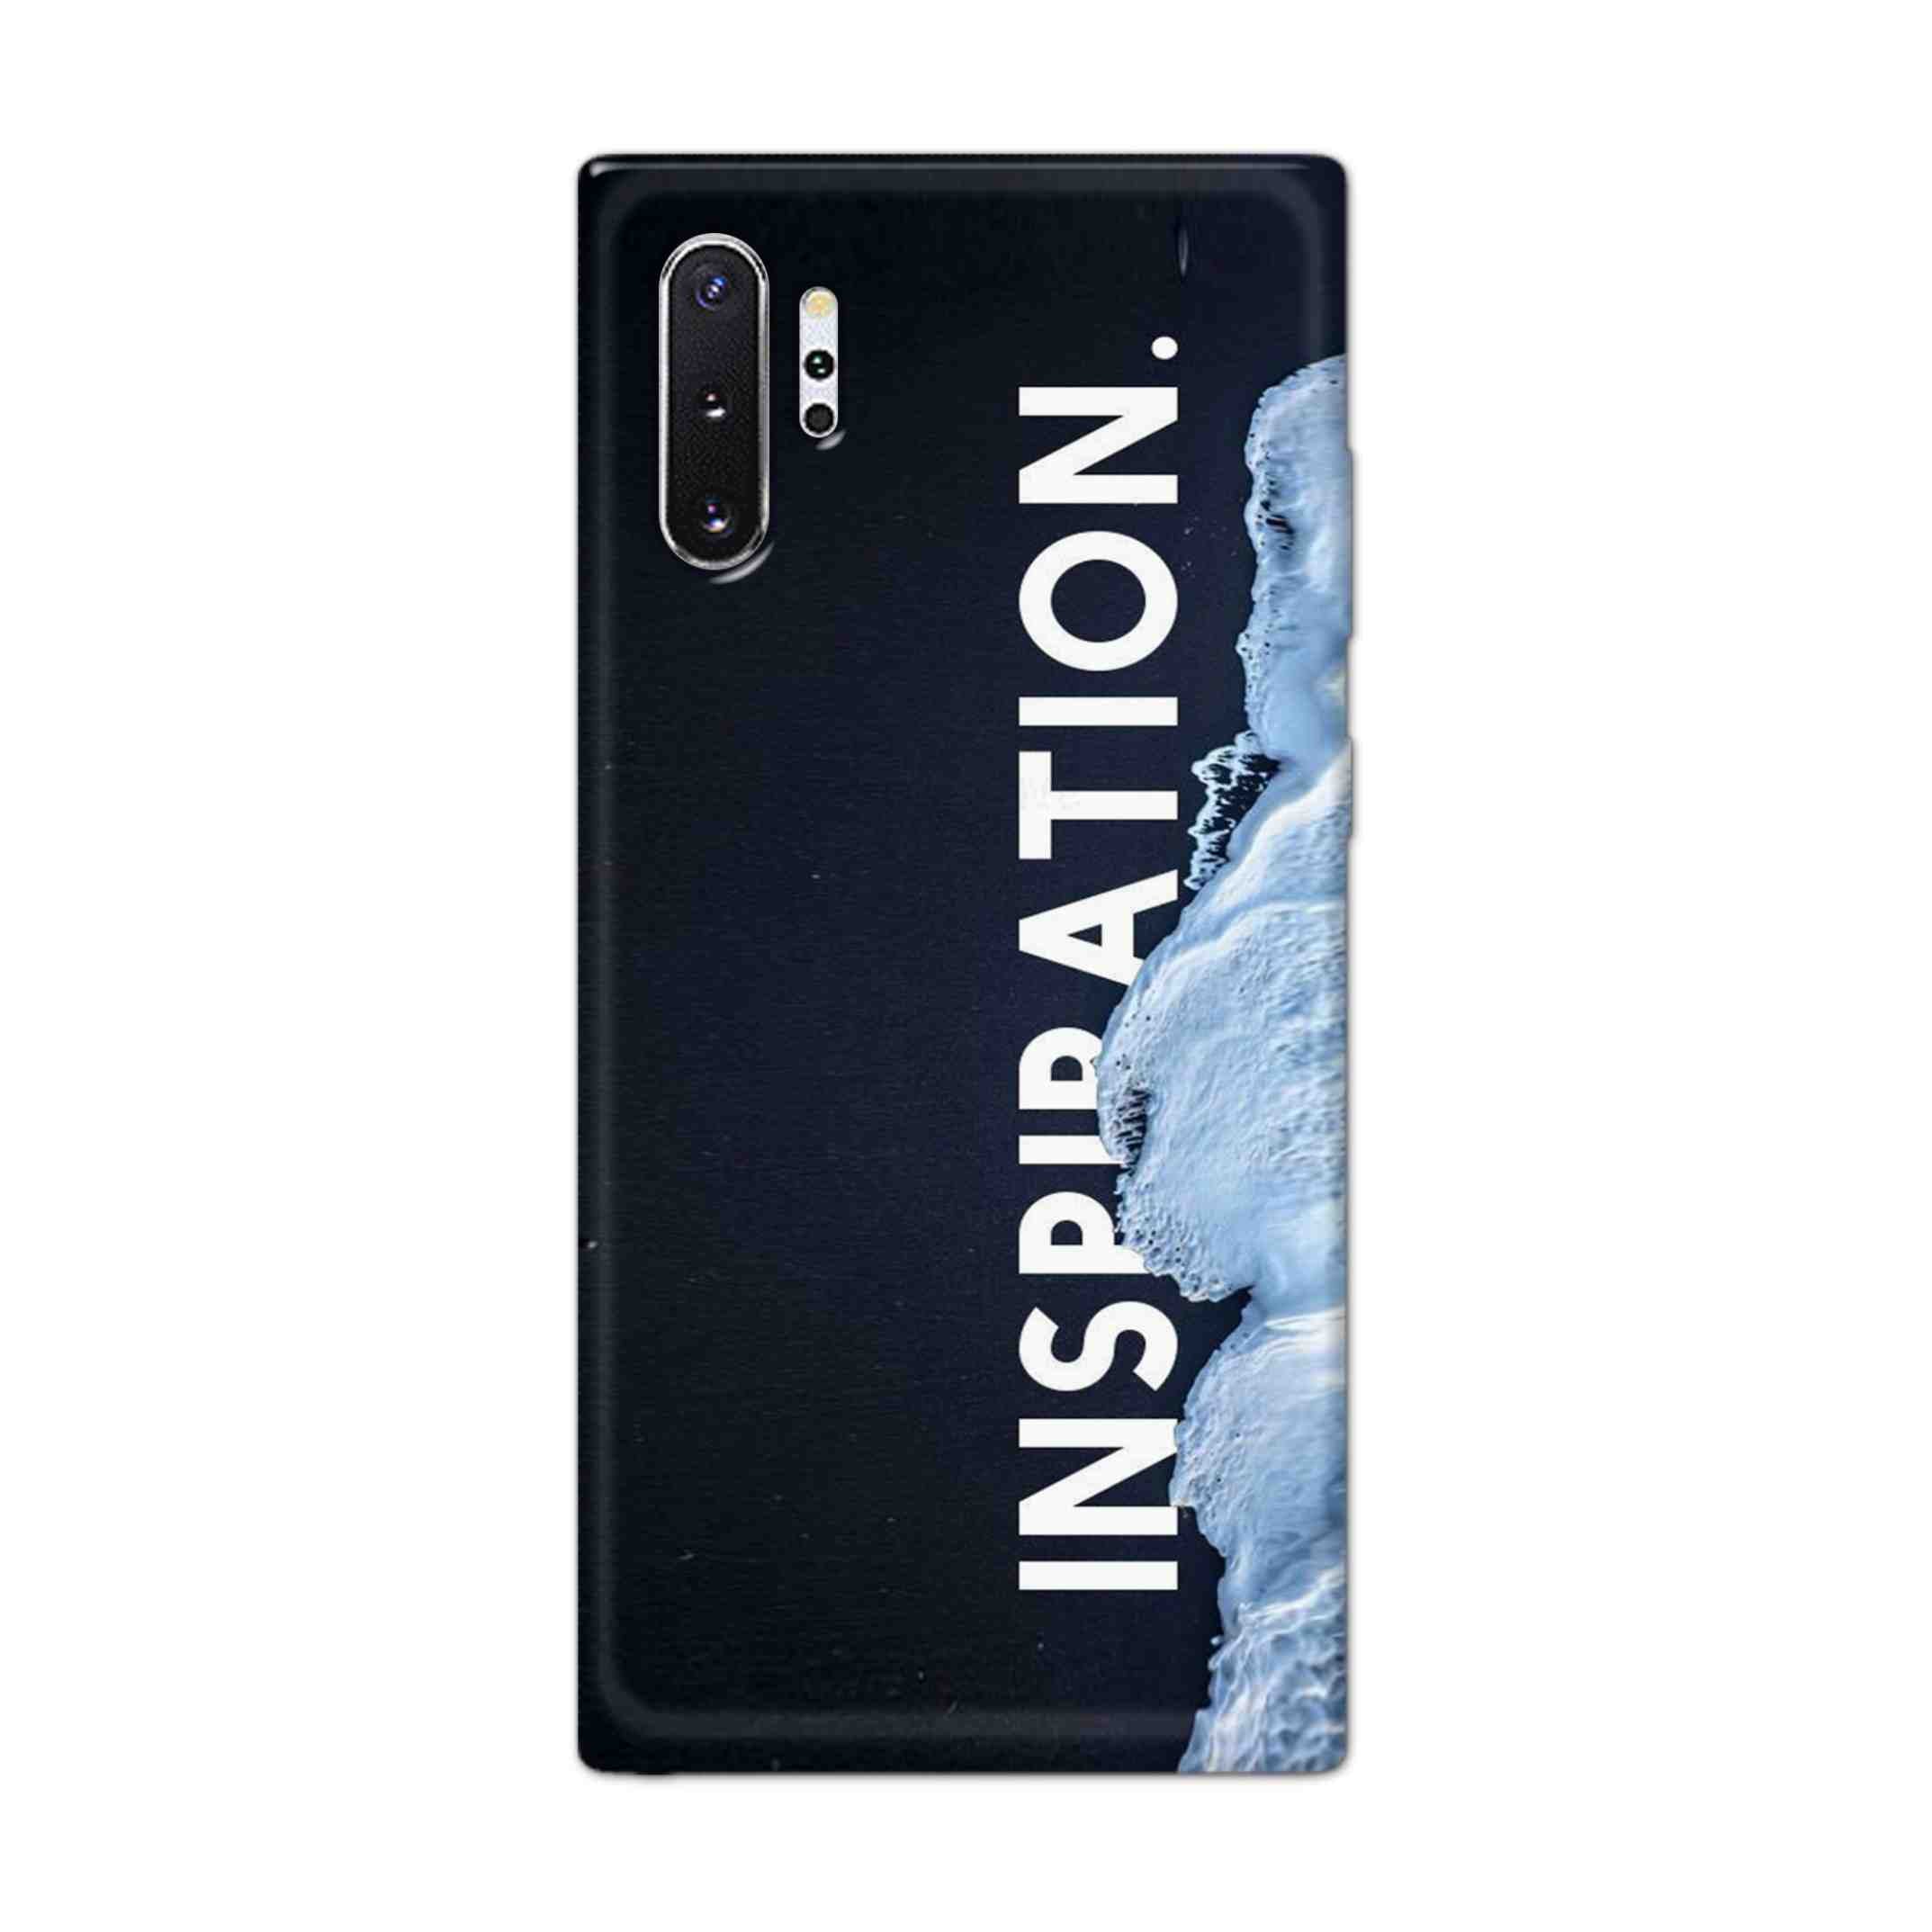 Buy Inspiration Hard Back Mobile Phone Case Cover For Samsung Note 10 Plus (5G) Online